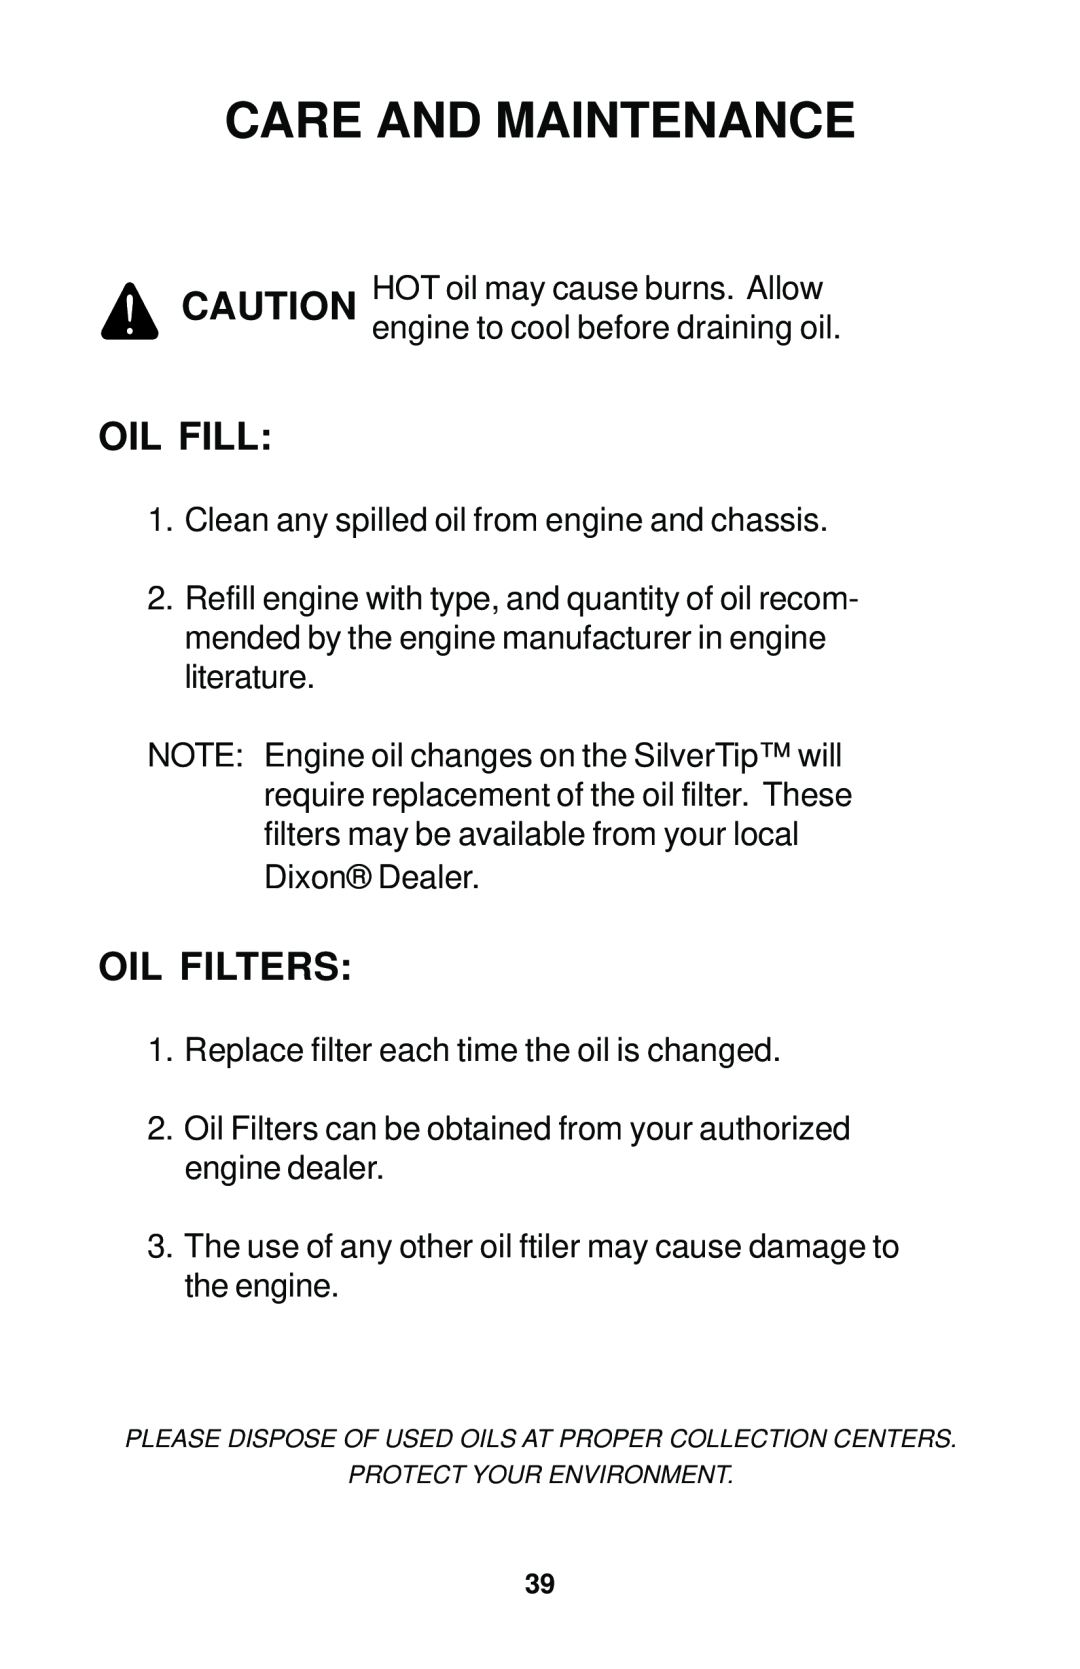 Dixon 12881-1104 manual Oil Fill, Oil Filters, Care And Maintenance 